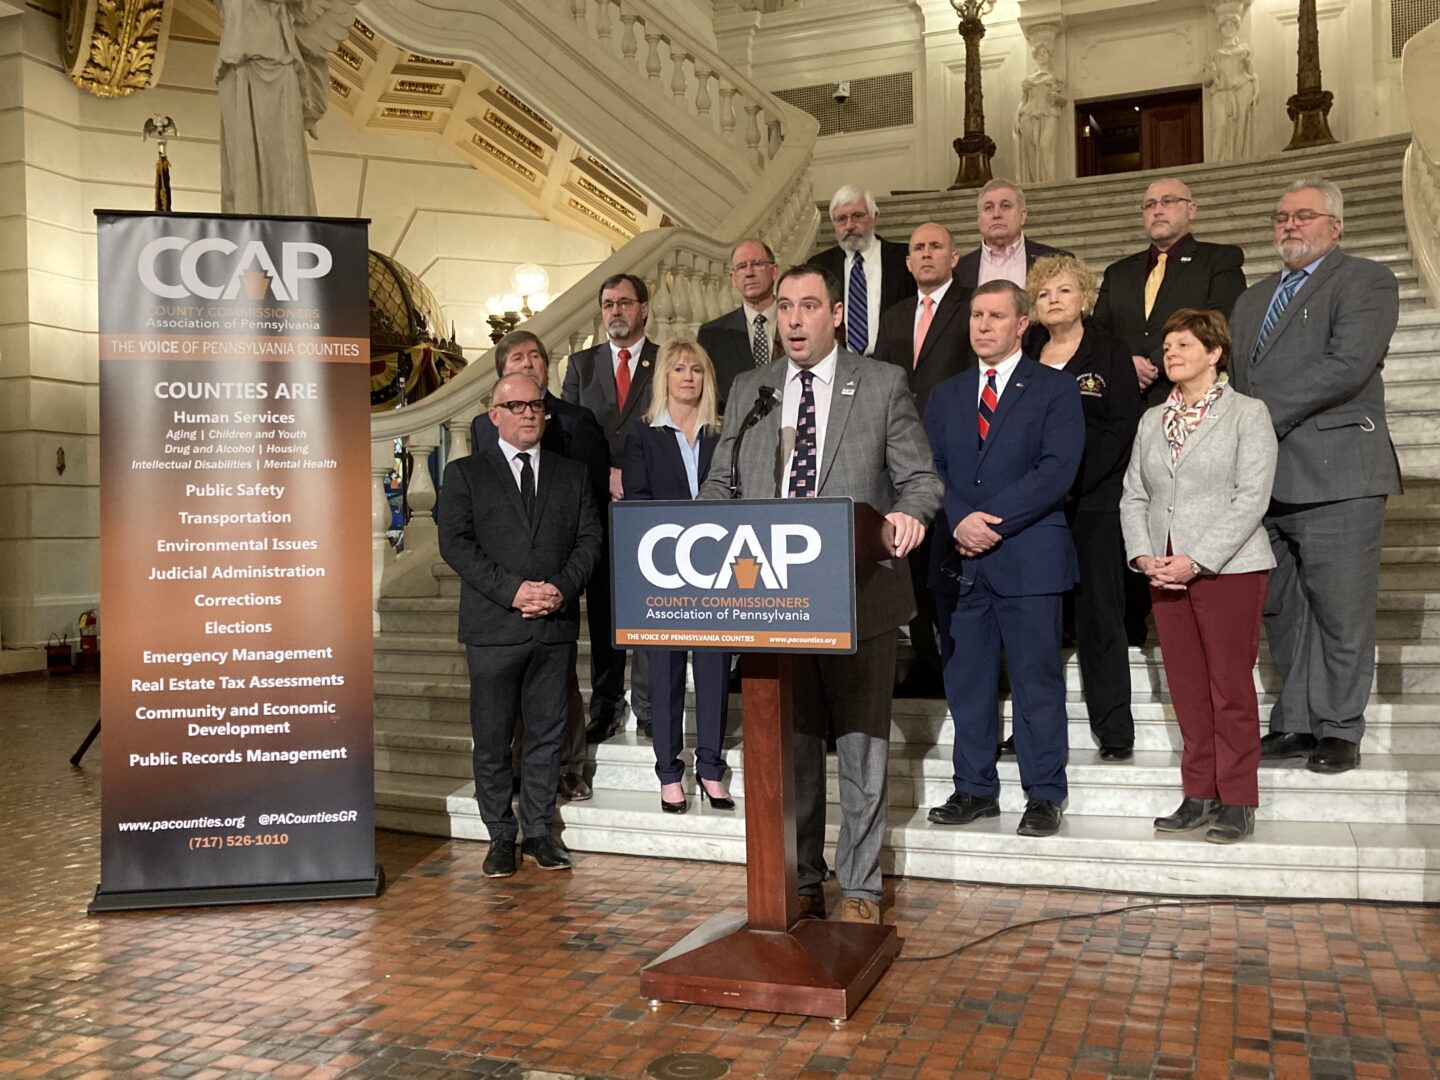 Pennsylvania County Commissioners Association President Chip Abramovic, surrounded by other county commissioners, speaks at a news conference in Harrisburg on January 25, 2023.